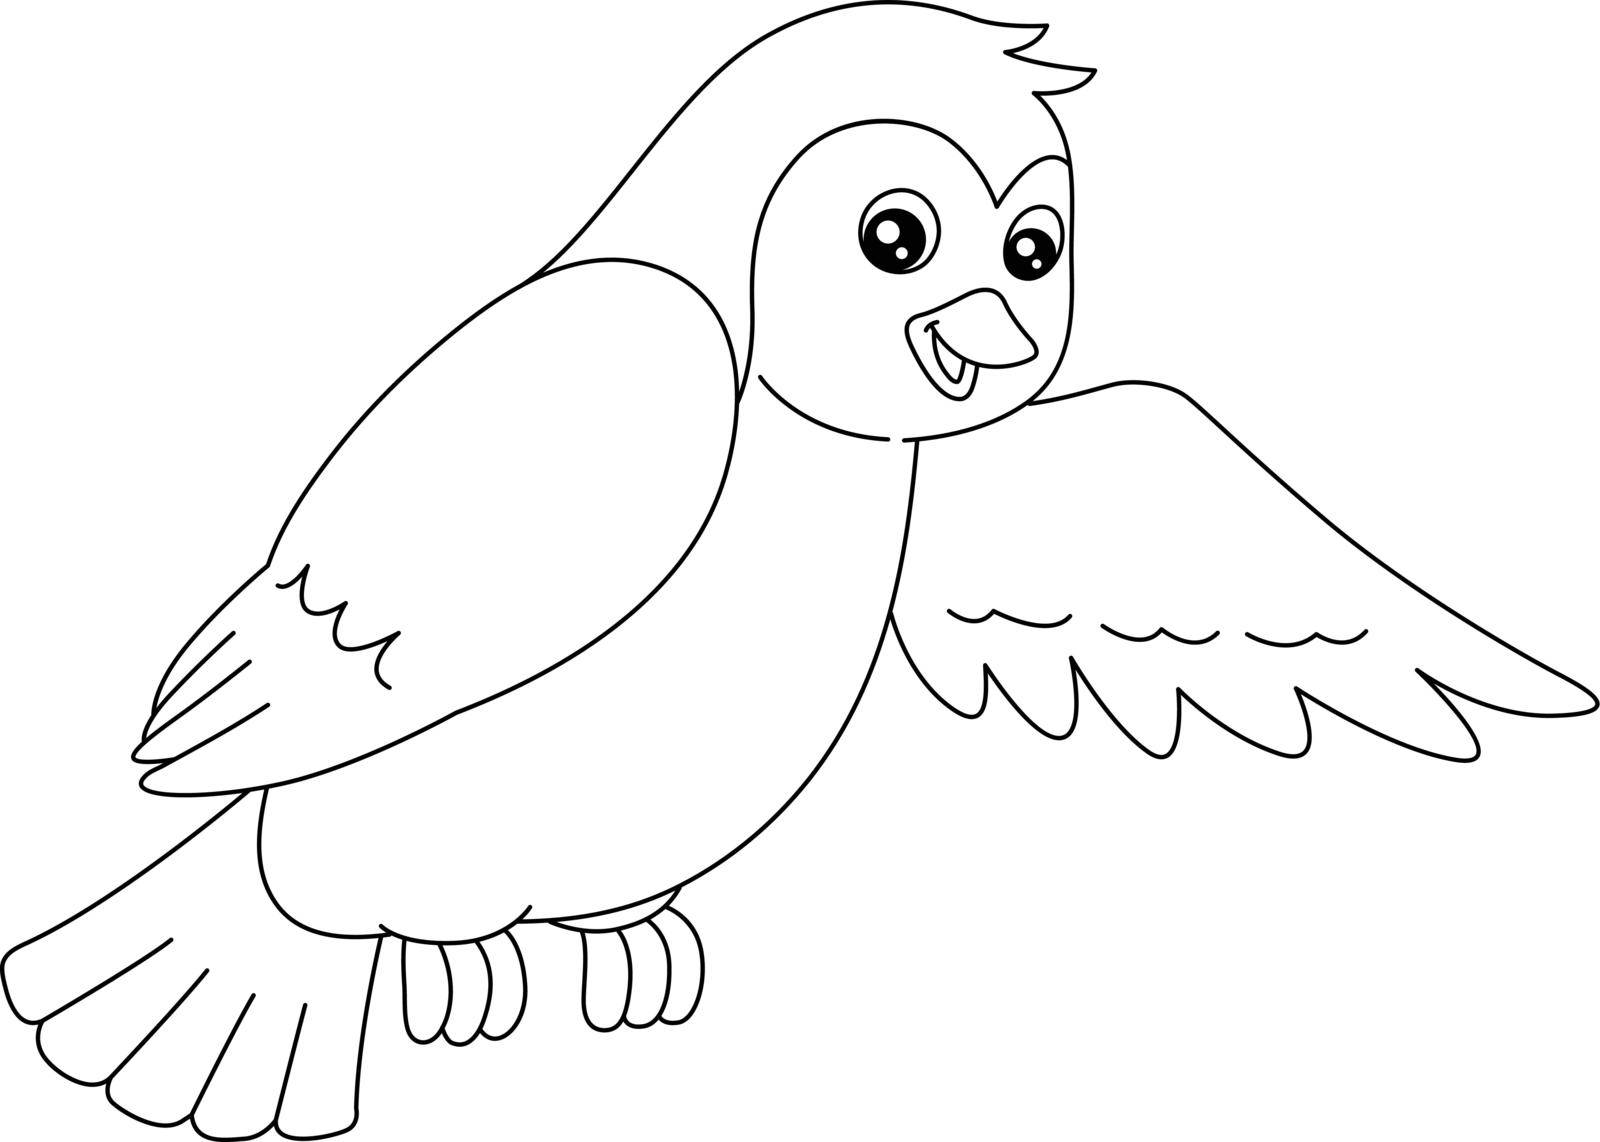 Bird Coloring Page Isolated for Kids by abbydesign